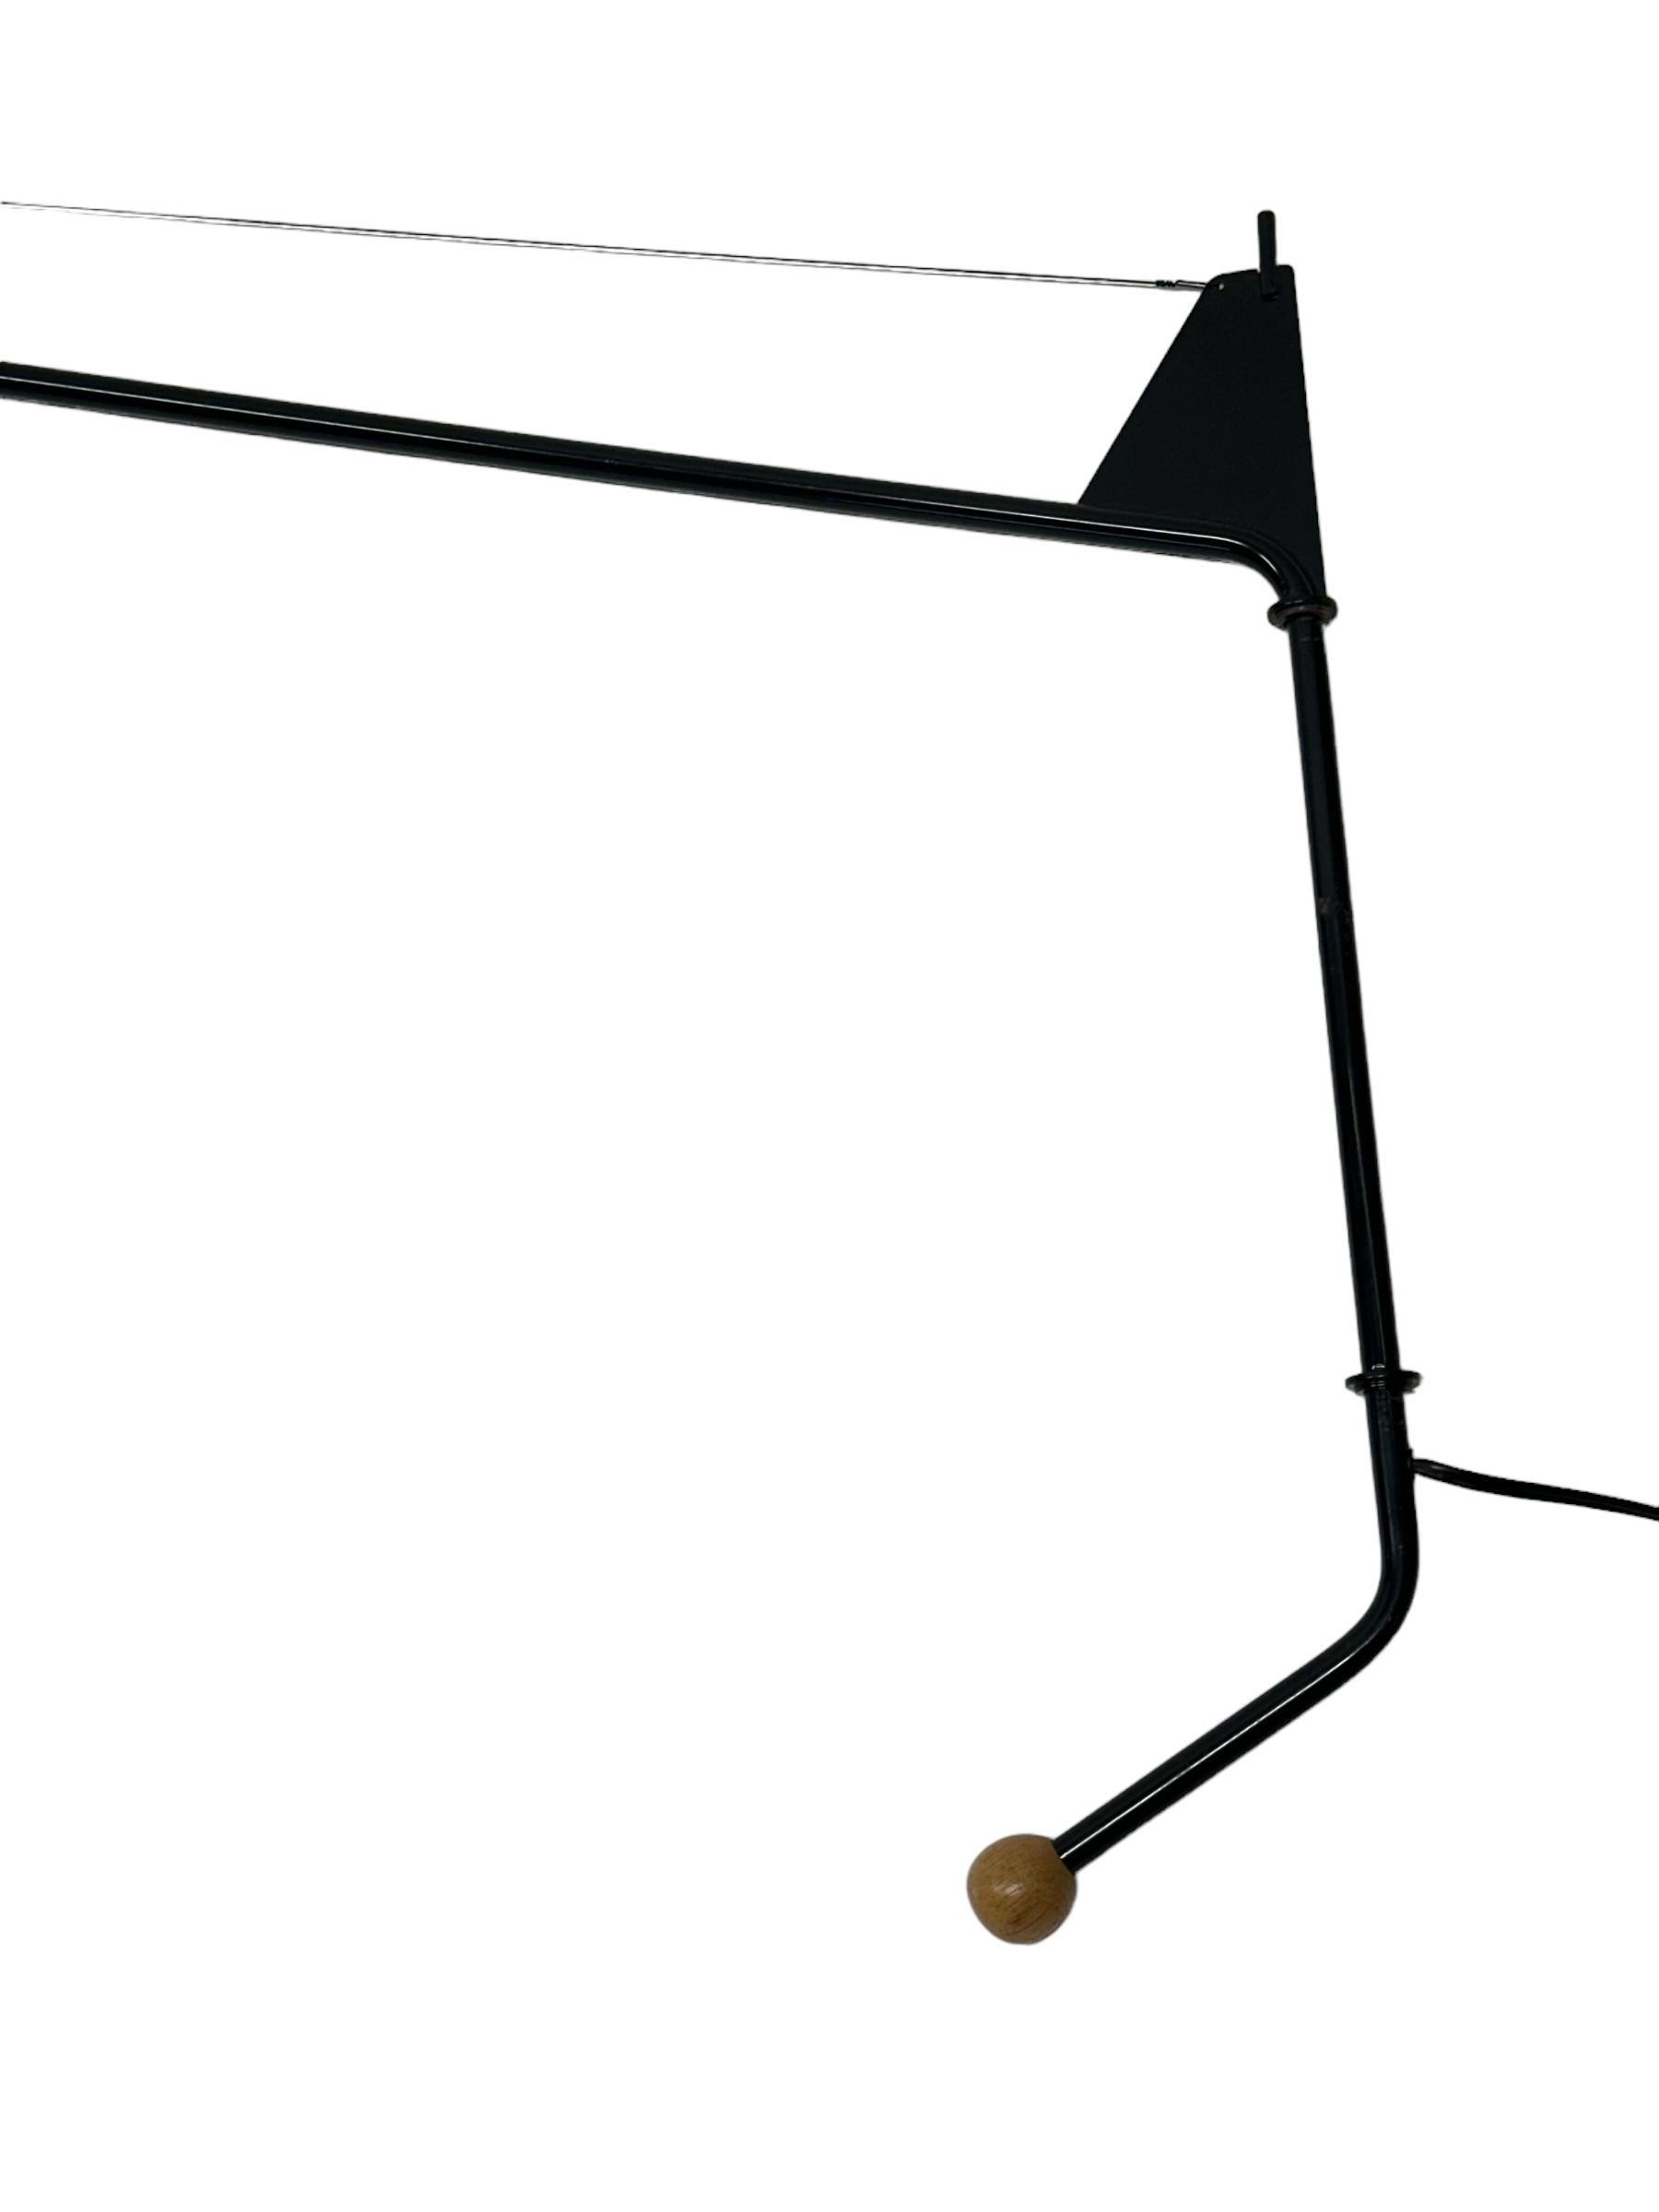 Jean Prouvé Potence Wall Lamp by Vitra For Sale 1